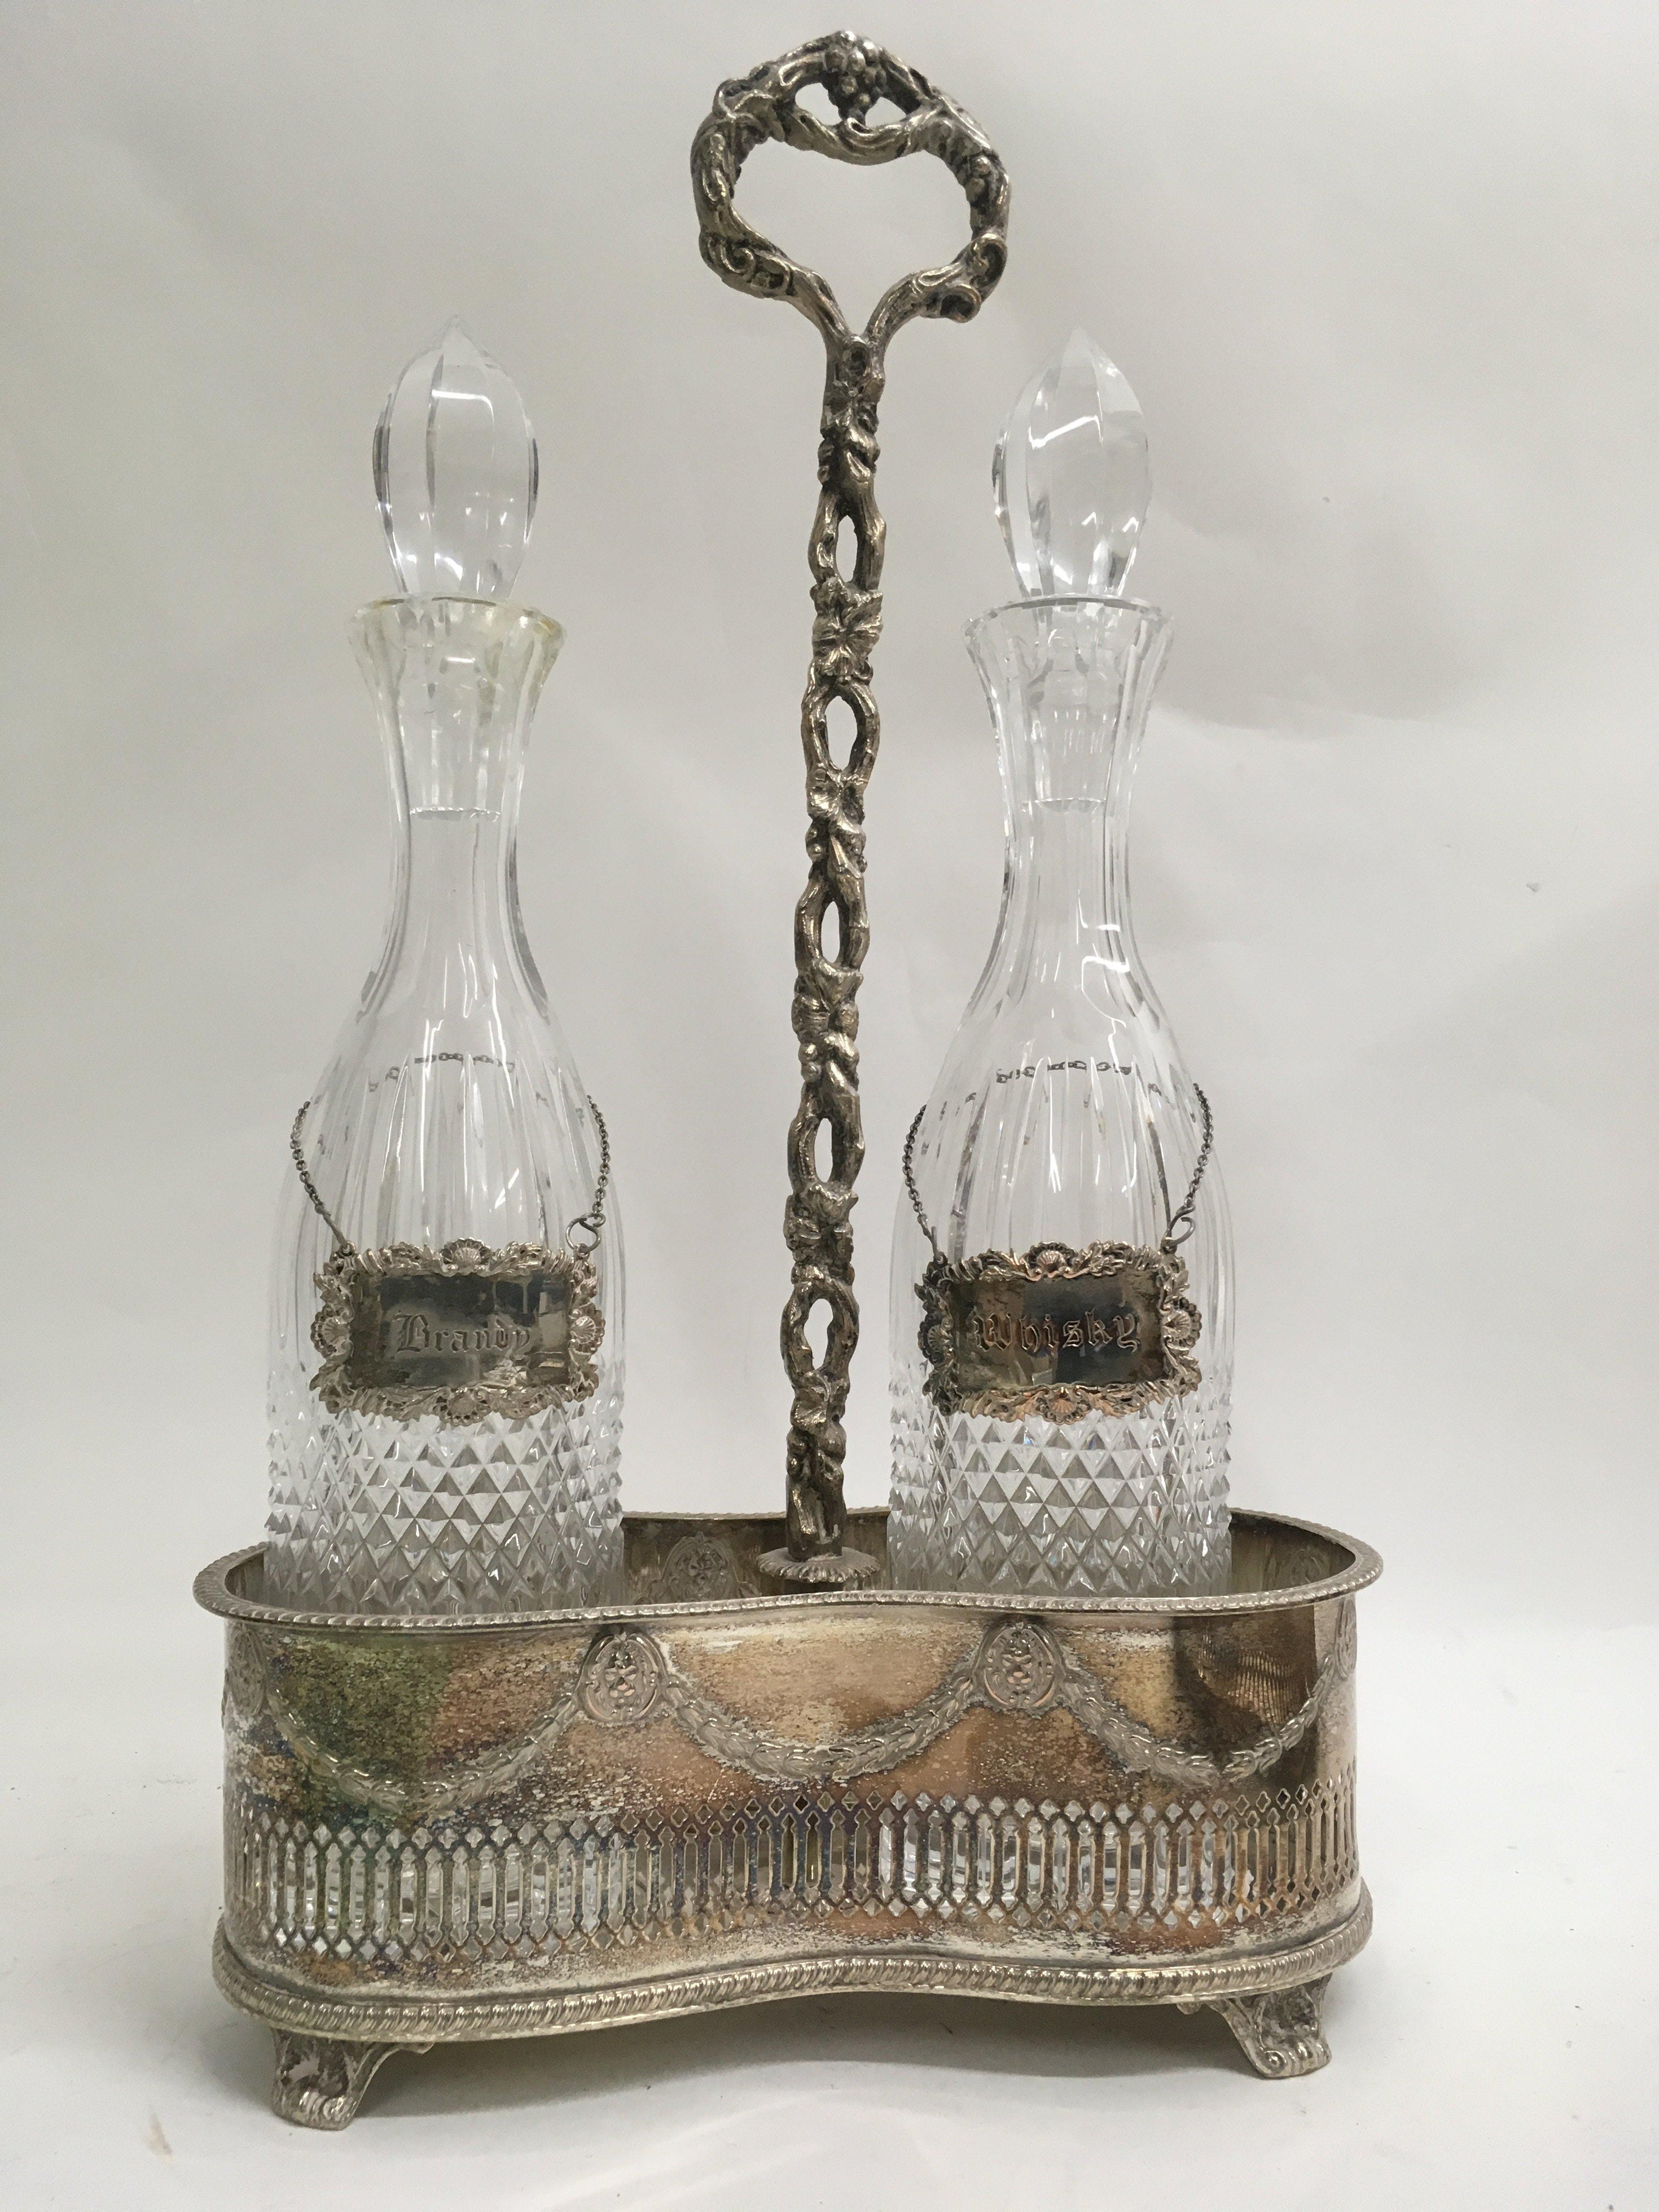 Two cut glass decanters with wine labels inset int